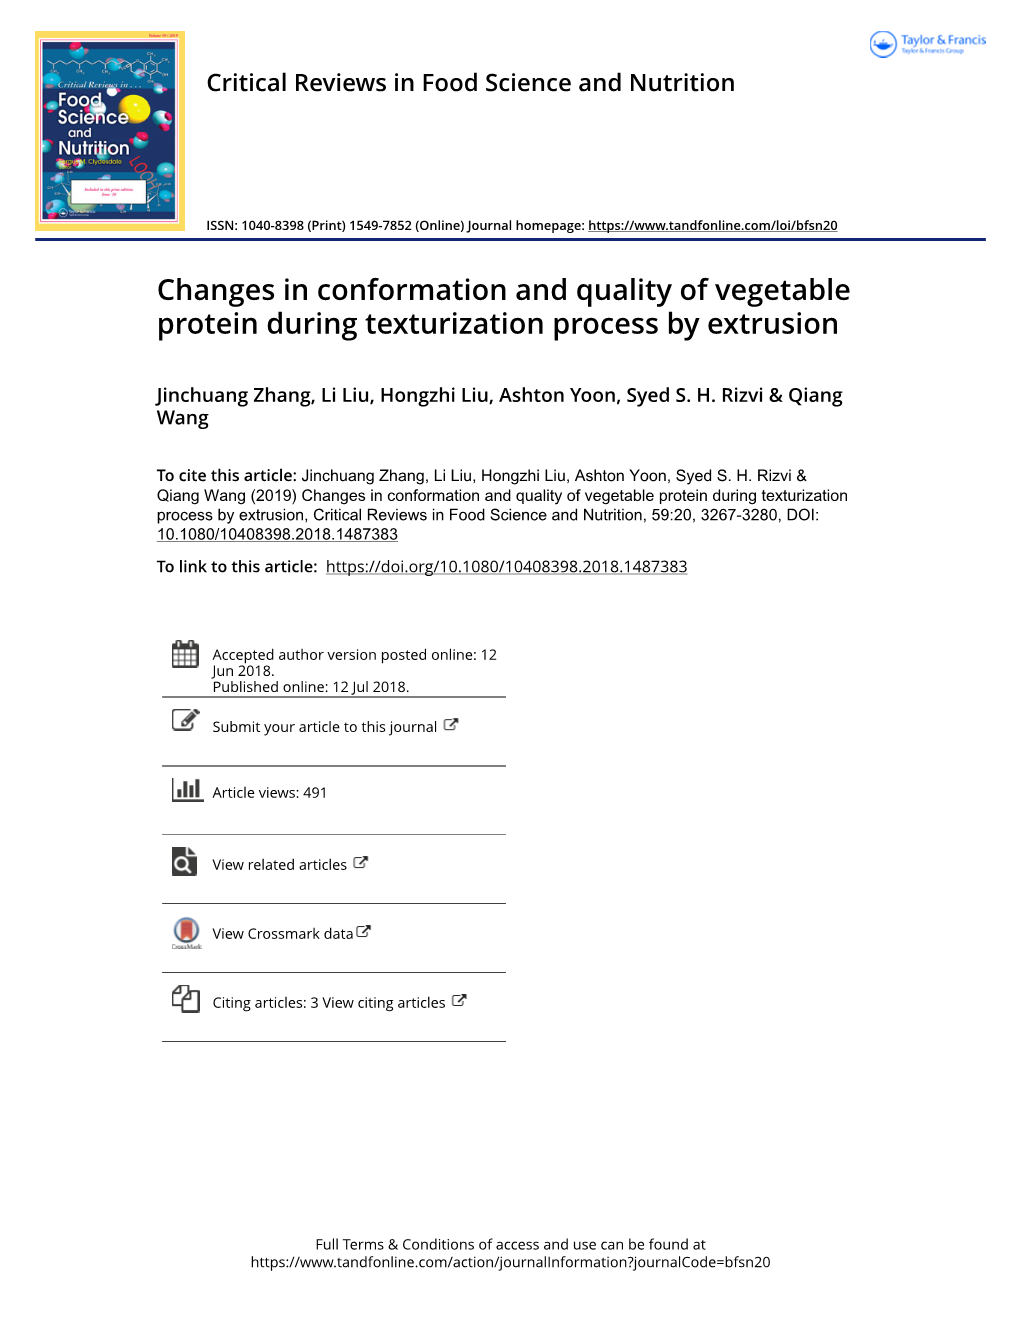 Changes in Conformation and Quality of Vegetable Protein During Texturization Process by Extrusion